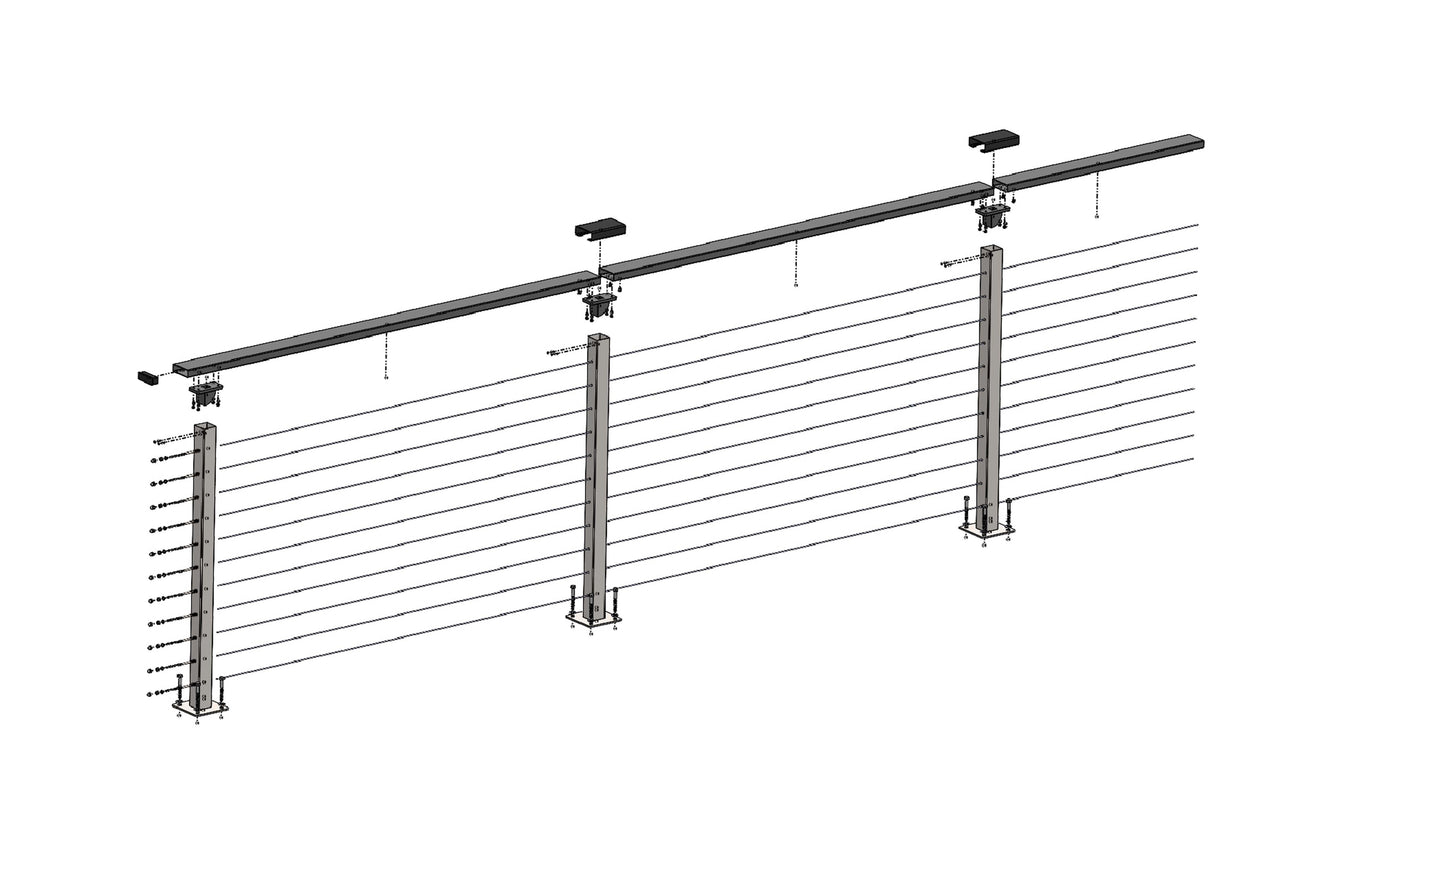 40 ft. x 42 in. Grey Deck Cable Railing, Base Mount , Stainless